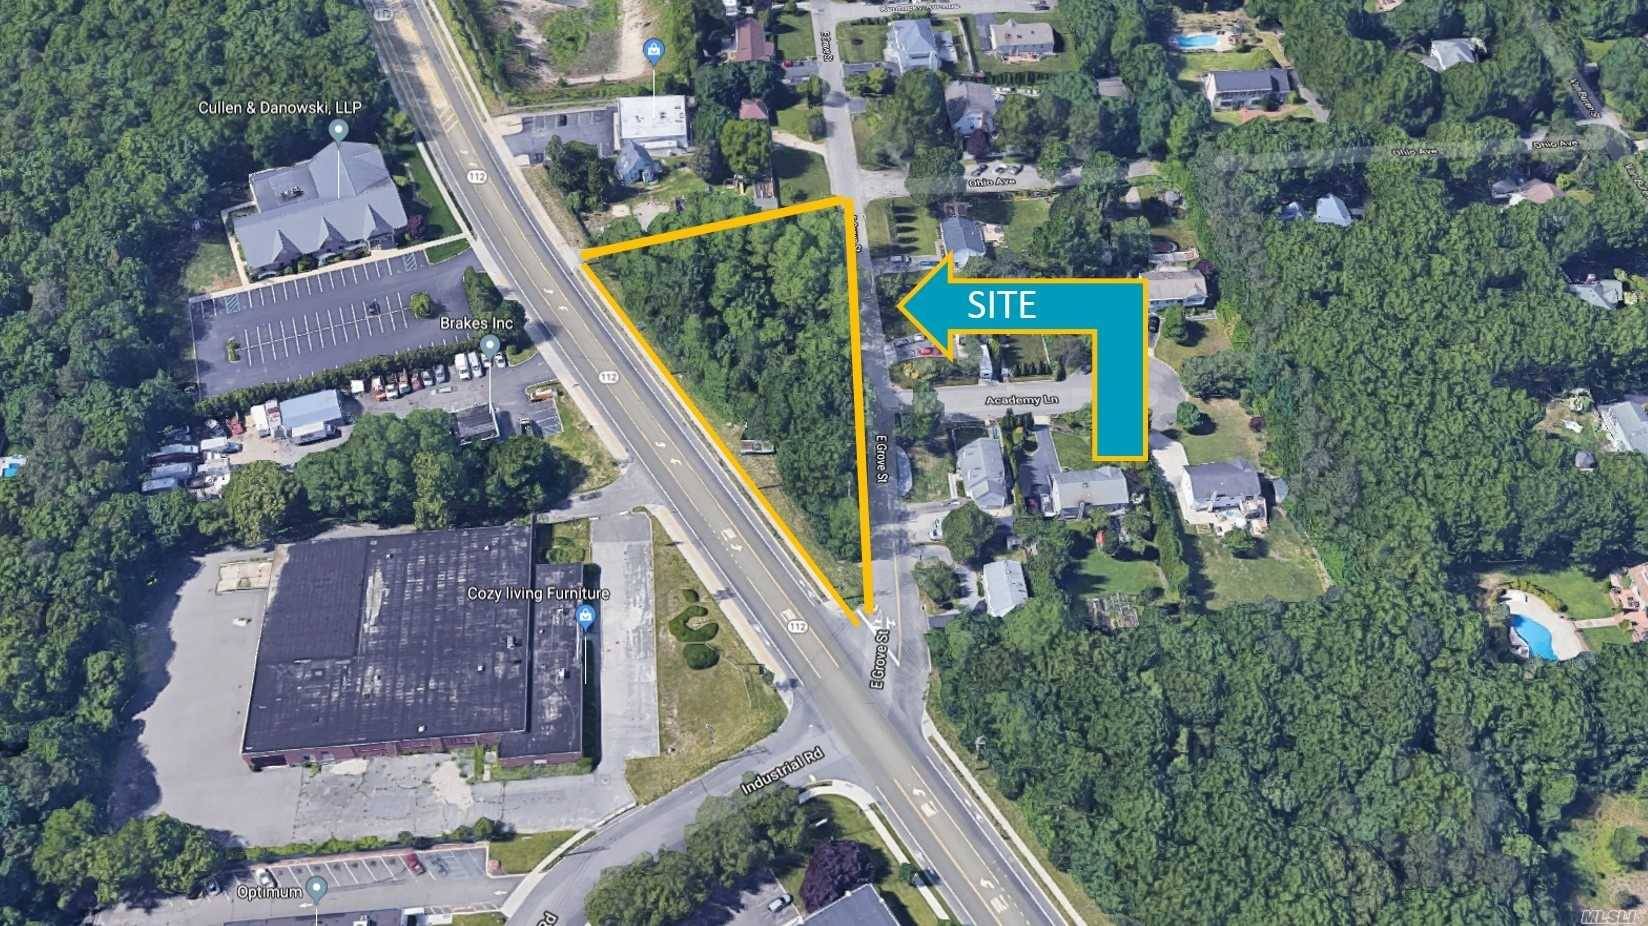 PRIME CORNER LOT. 0. 77 ACRES J 4 ZONING MAY BE USED FOR OFFICE, DAYCARE, RETAIL.